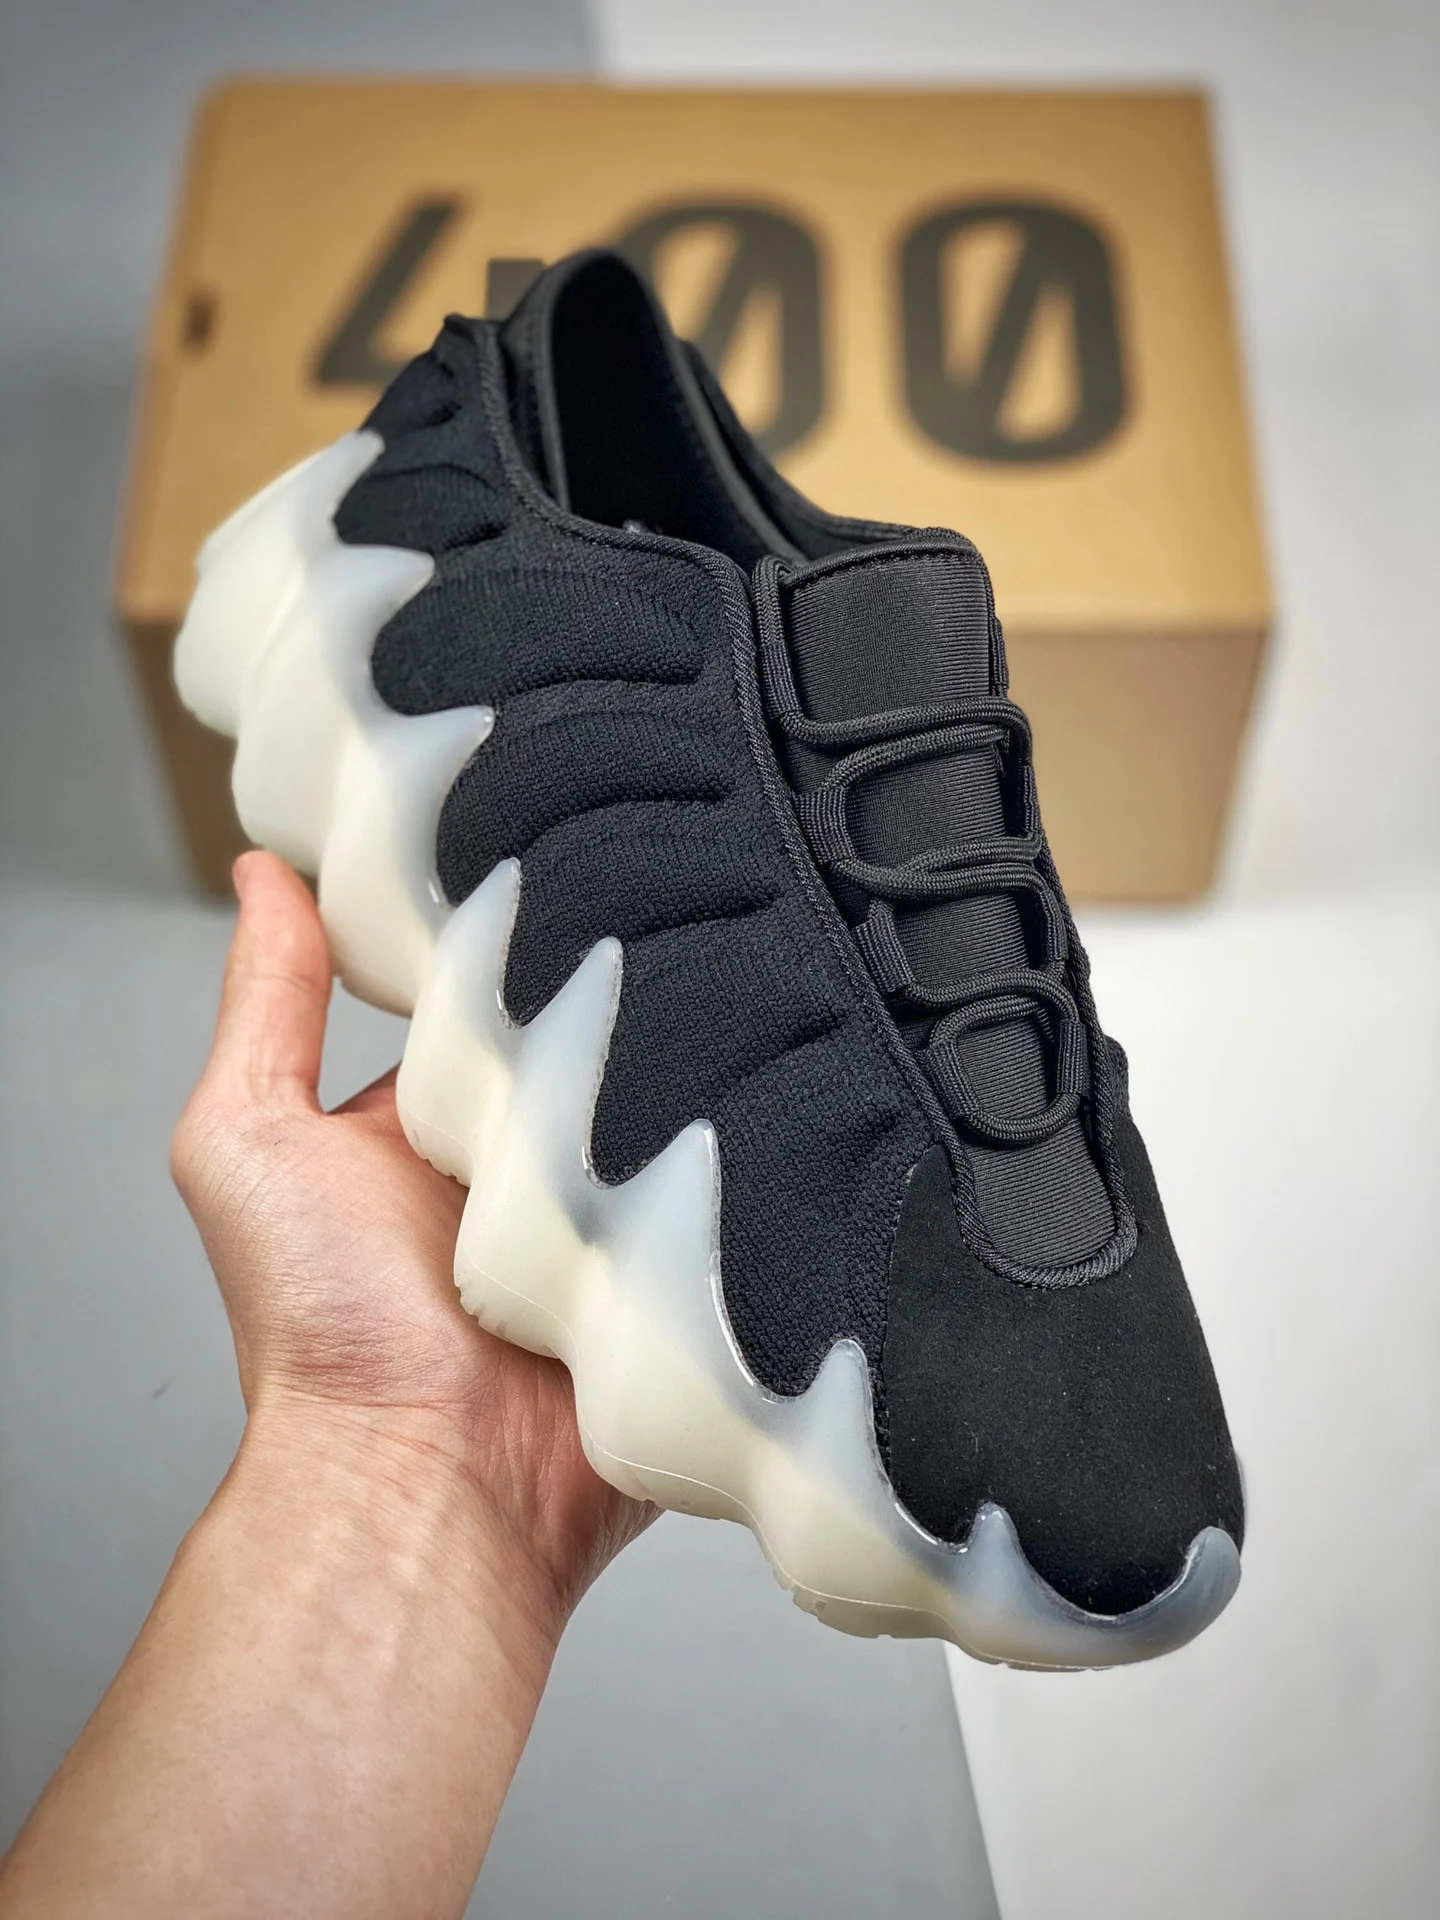 Adidas Yeezy Boost 400 Black White For Sale